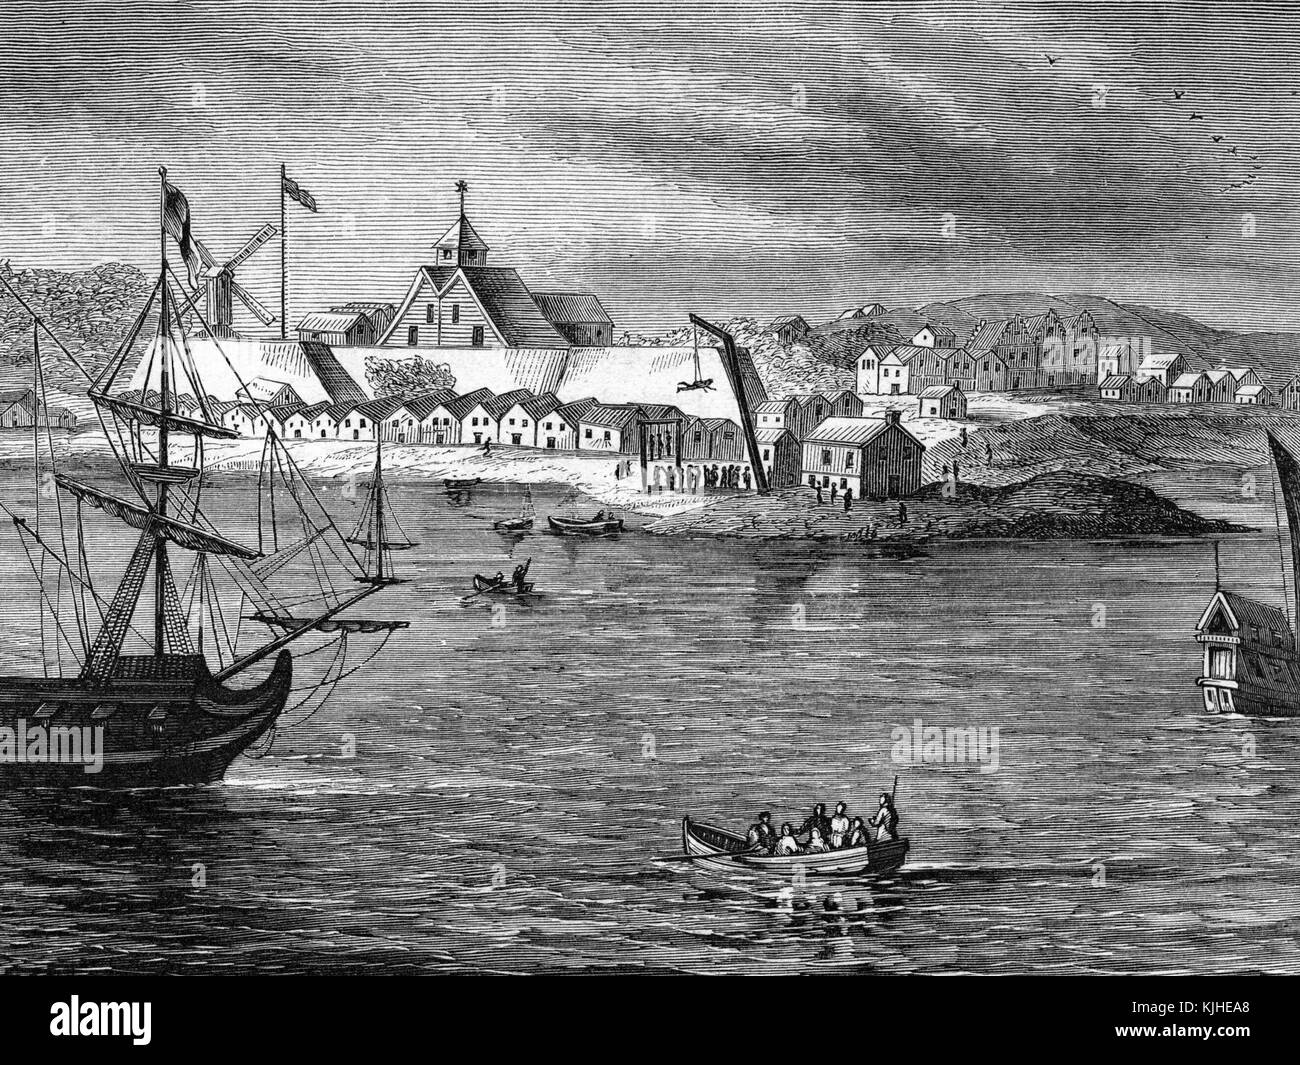 Lithograph depicting a view of Fort Amsterdam, a fort on the southern tip of Manhattan that was the administrative headquarters for the Dutch and then English/British rule of New York from 1625 or 1626 until being torn down in 1790 after the American Revolution, at about 1650, as seen from the water, the fort and other structures in the background, New York, 1800. From the New York Public Library. Stock Photo